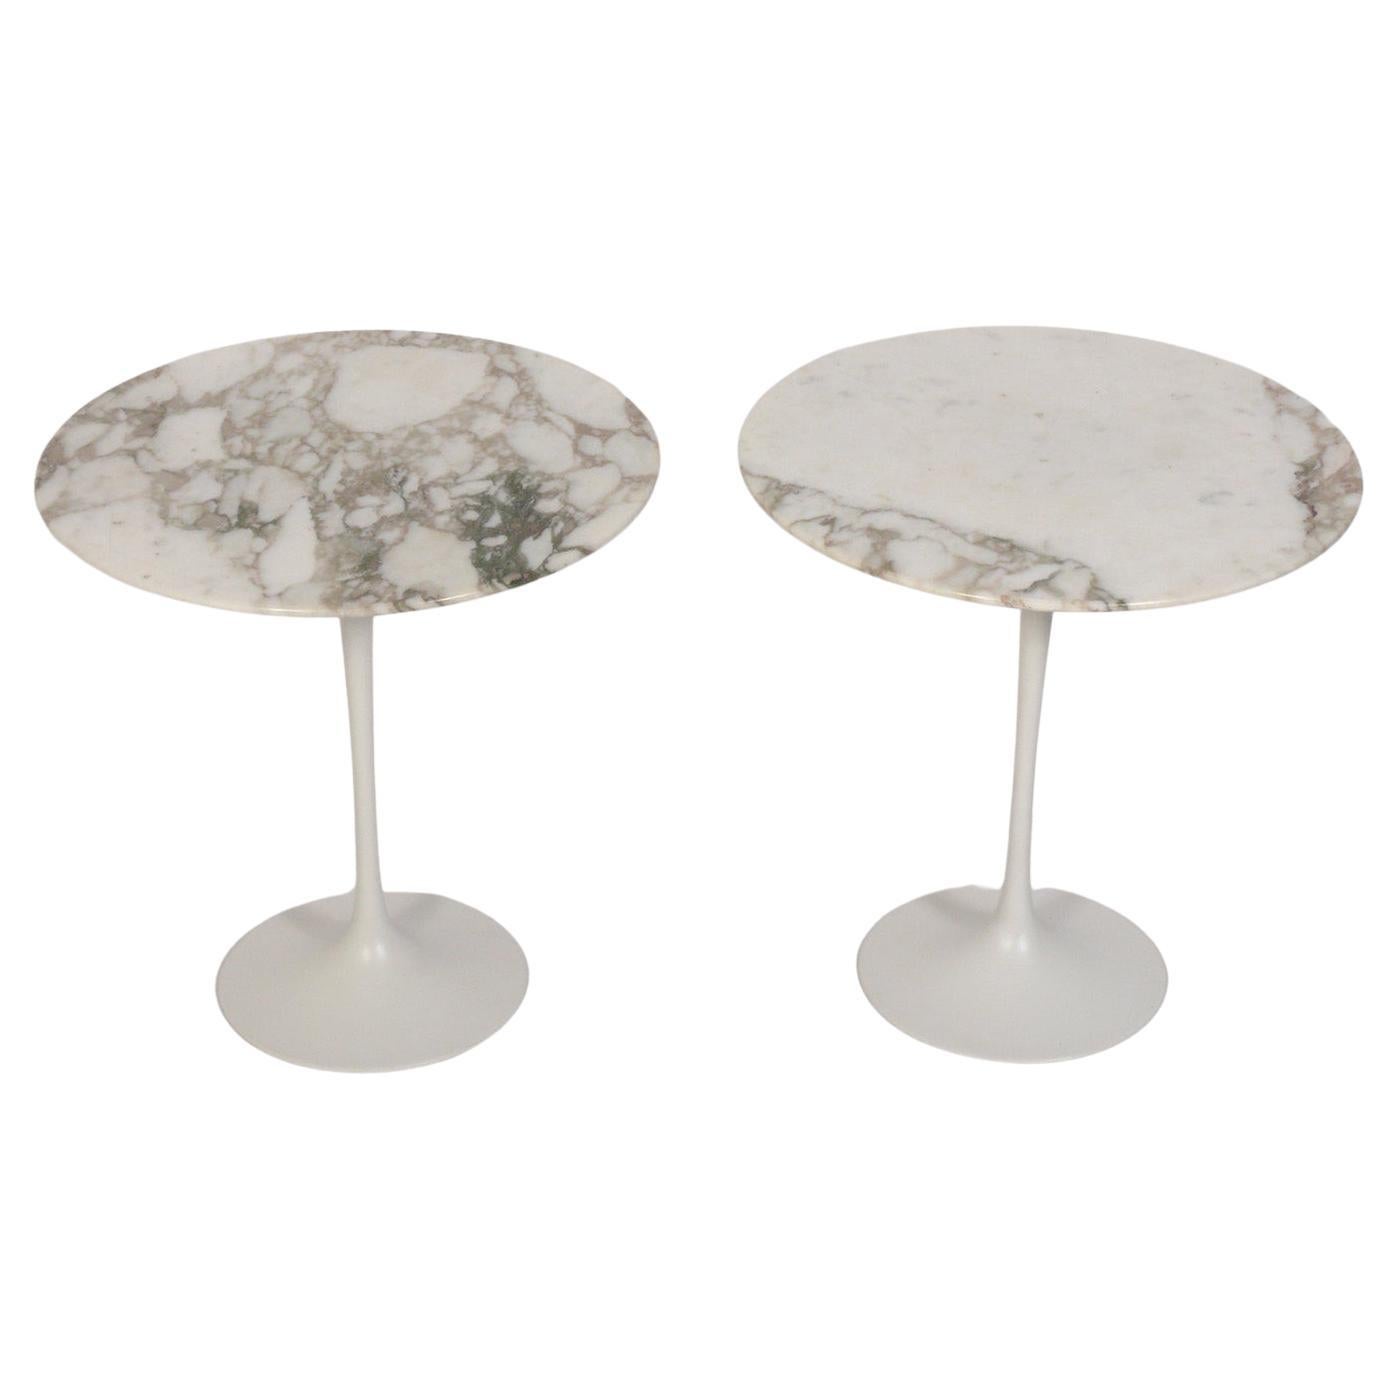 Pair of Eero Saarinen Marble Top End or Side Tables for Knoll circa 1970s For Sale